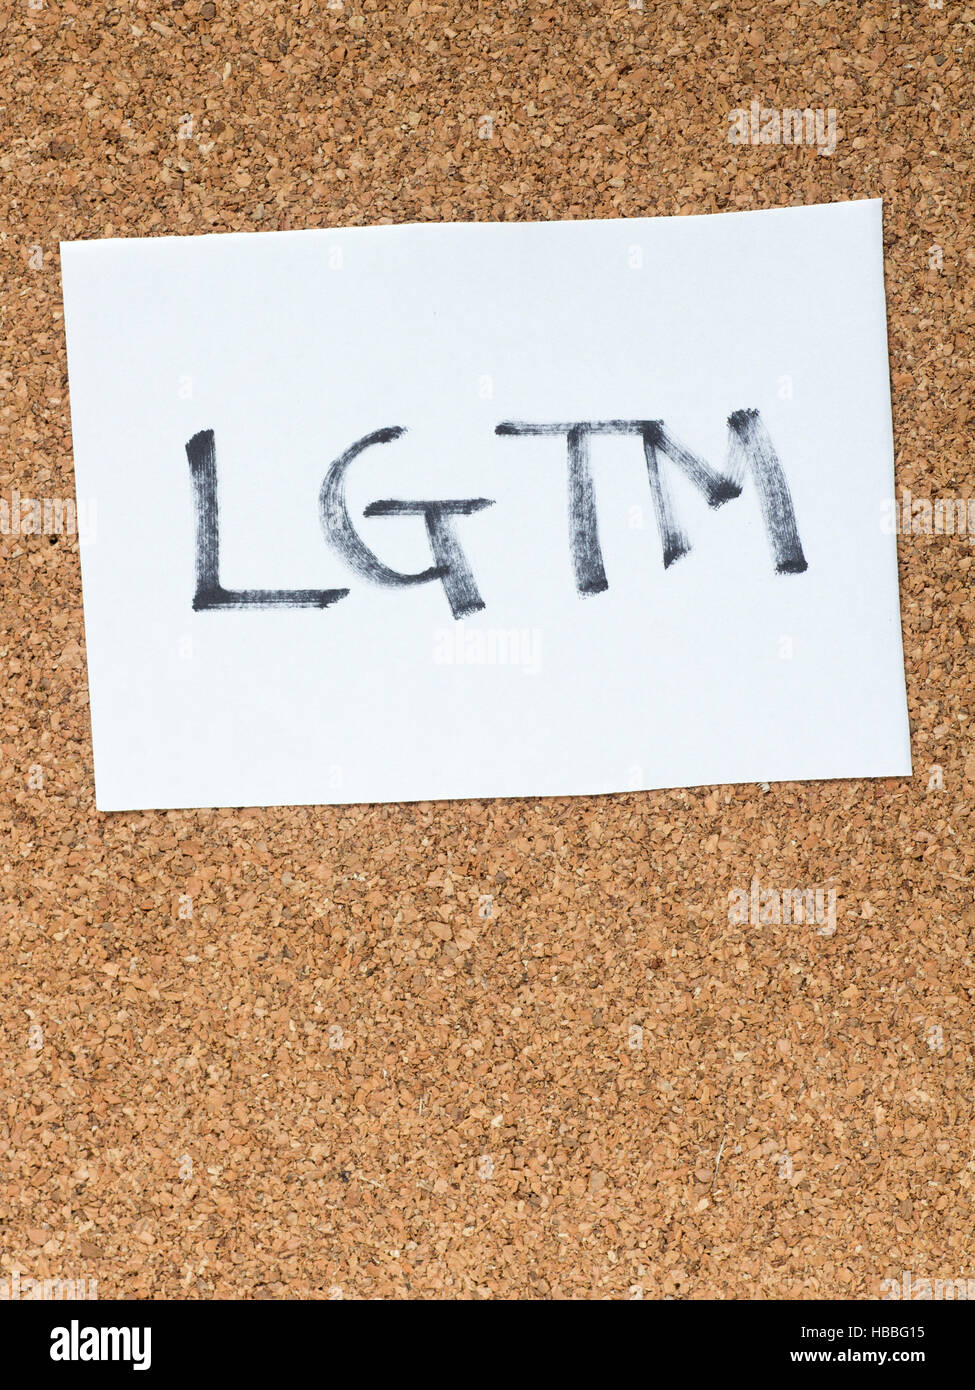 Lgtm High Resolution Stock Photography And Images Alamy